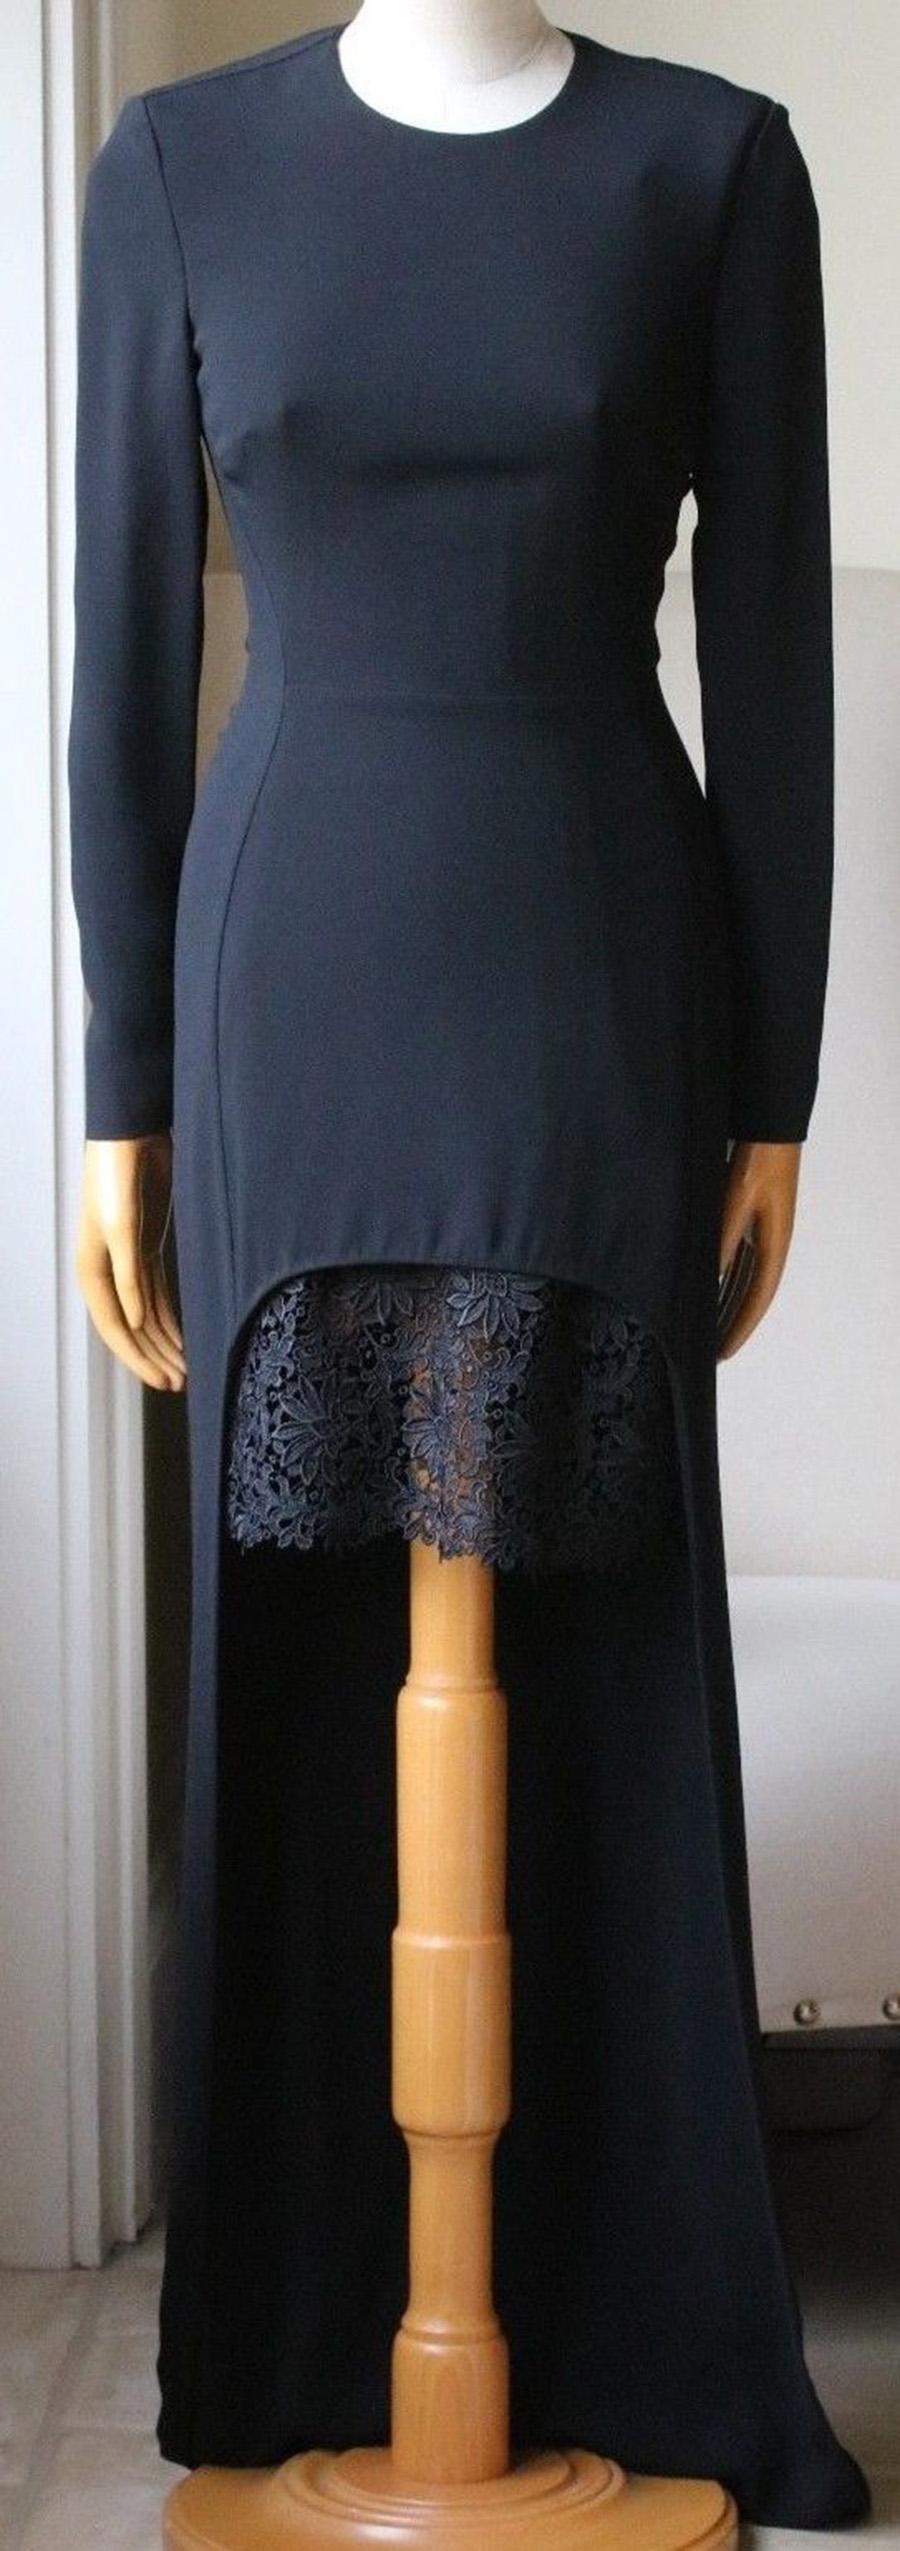 The black Cady fabric is juxtaposed with a thick lace underskirt, while the contrasting hem elongates the legs. This black Cady dress has a close fitting round-neck, long sleeves and features a longer length back and lace trimmed shorter front hem.